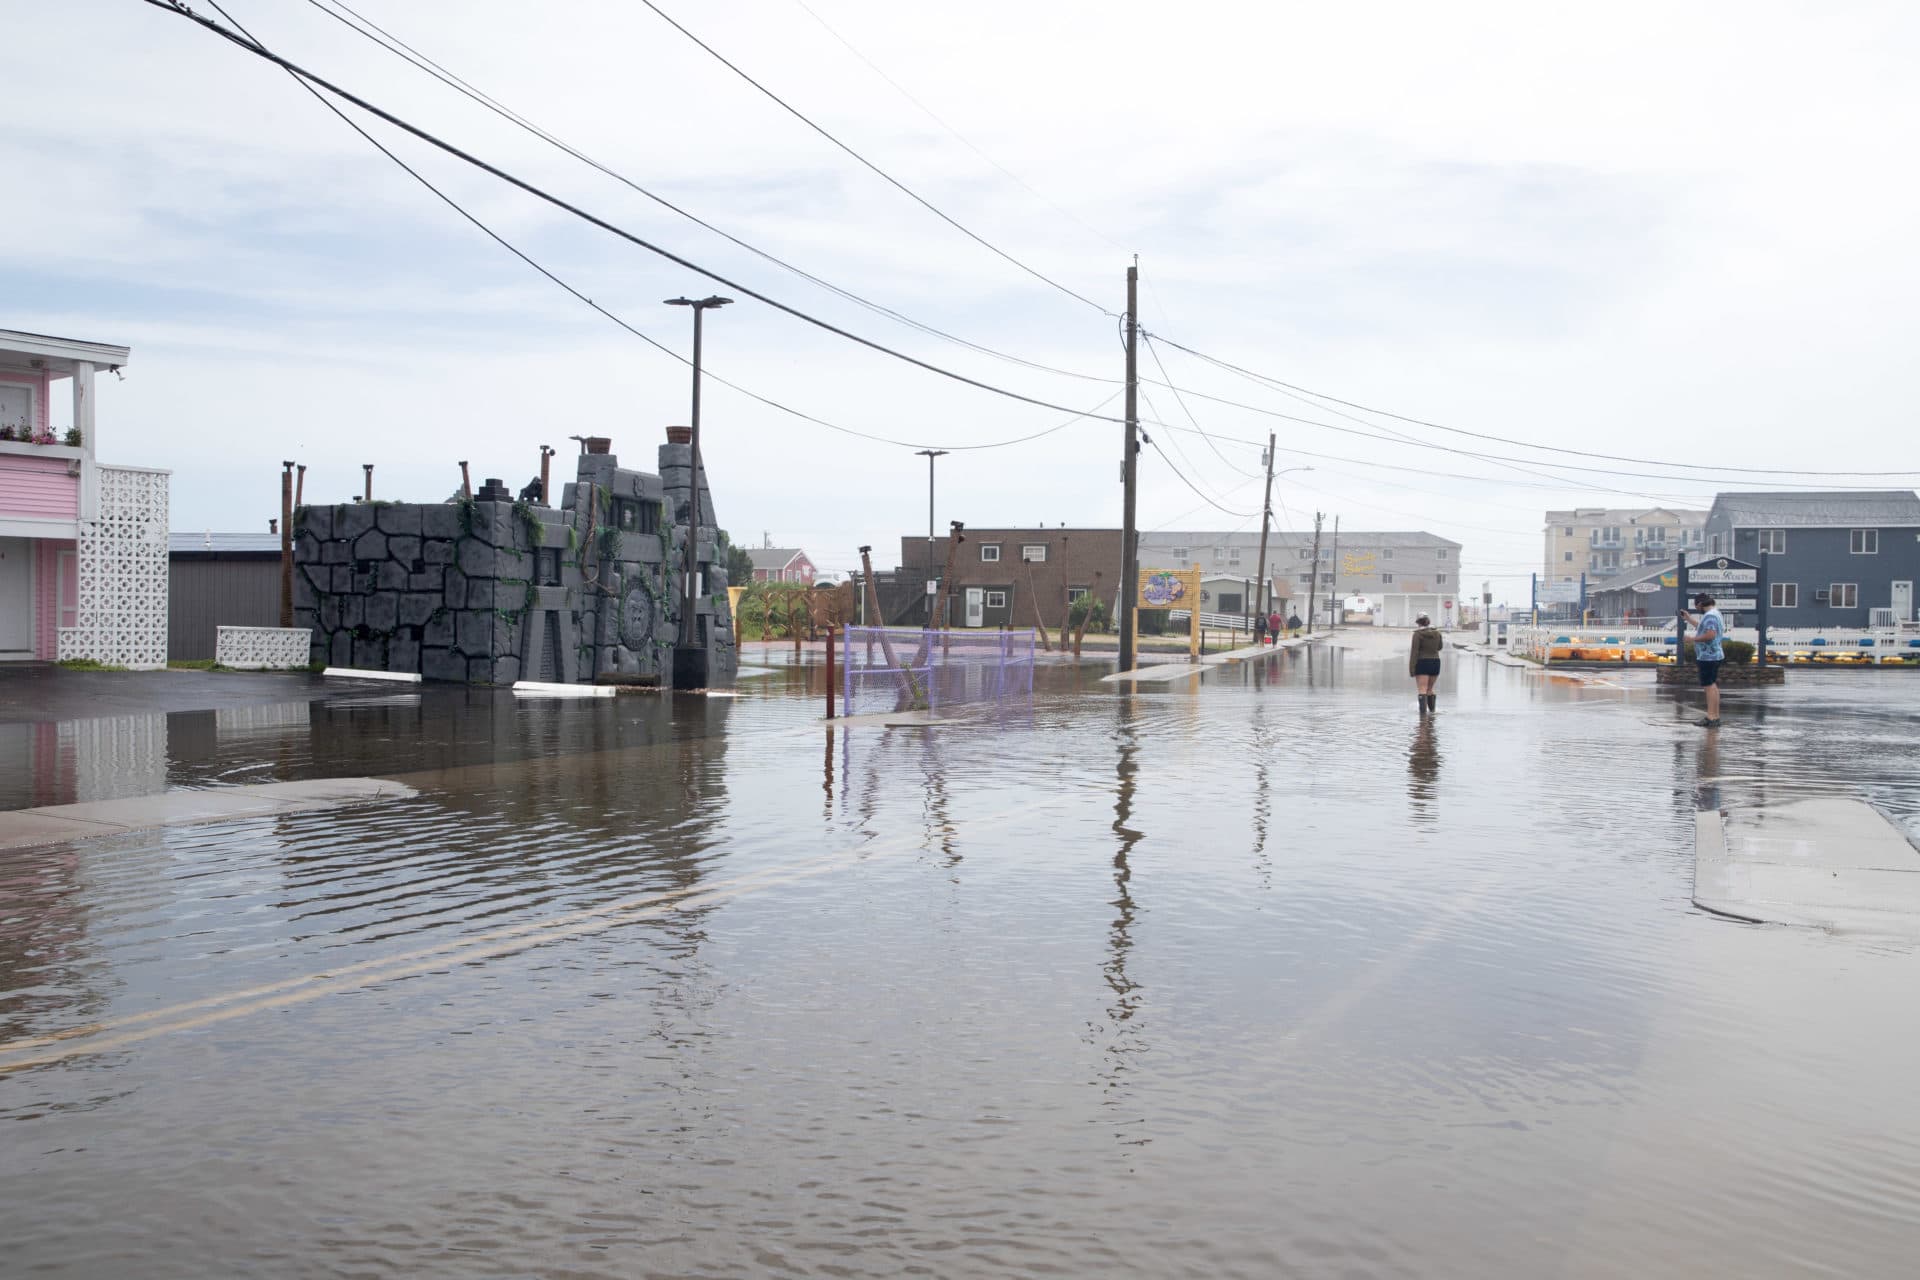 A person walks on a flooded road during Tropical Storm Henri in Westerly, Rhode Island. (Scott Eisen/Getty Images)